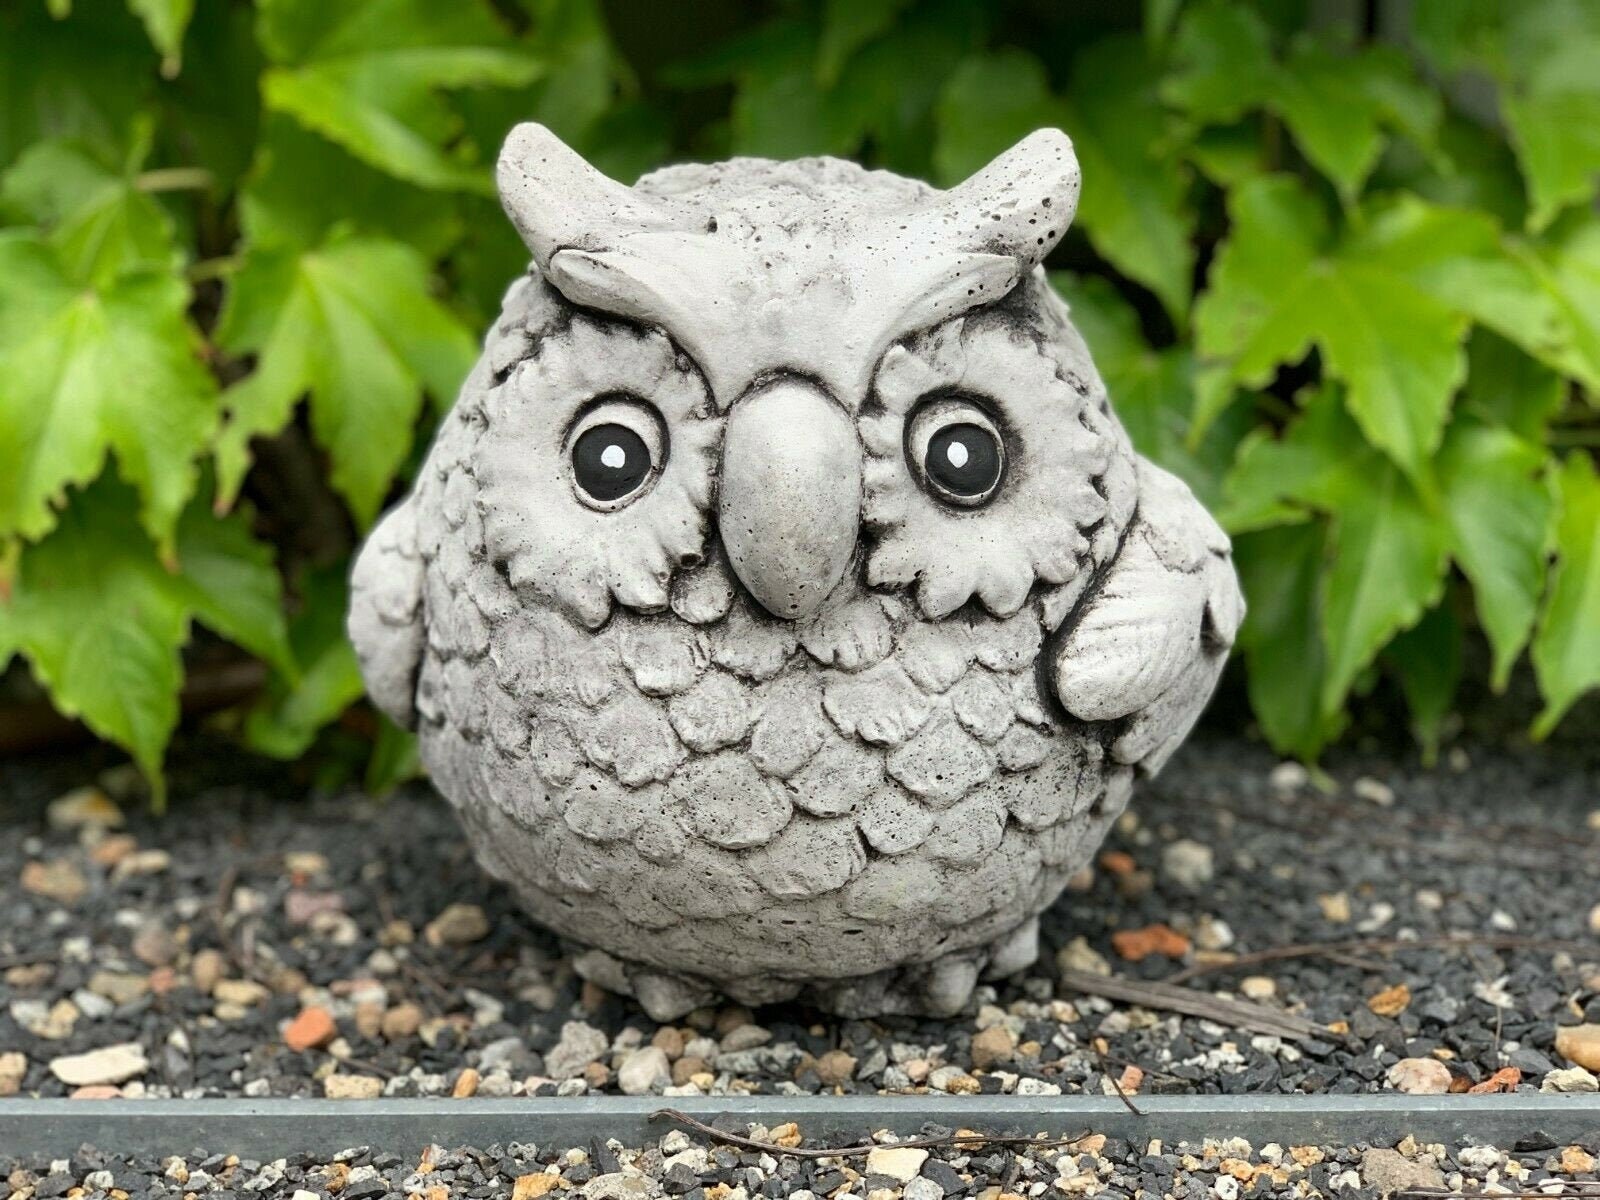 Amazon.com: Owl Decor Garden Statue Resin Fake Owl Figurine Garden Lawn  with Solar LED Lights for Outdoor Yard Garden Decorations : Tools & Home  Improvement